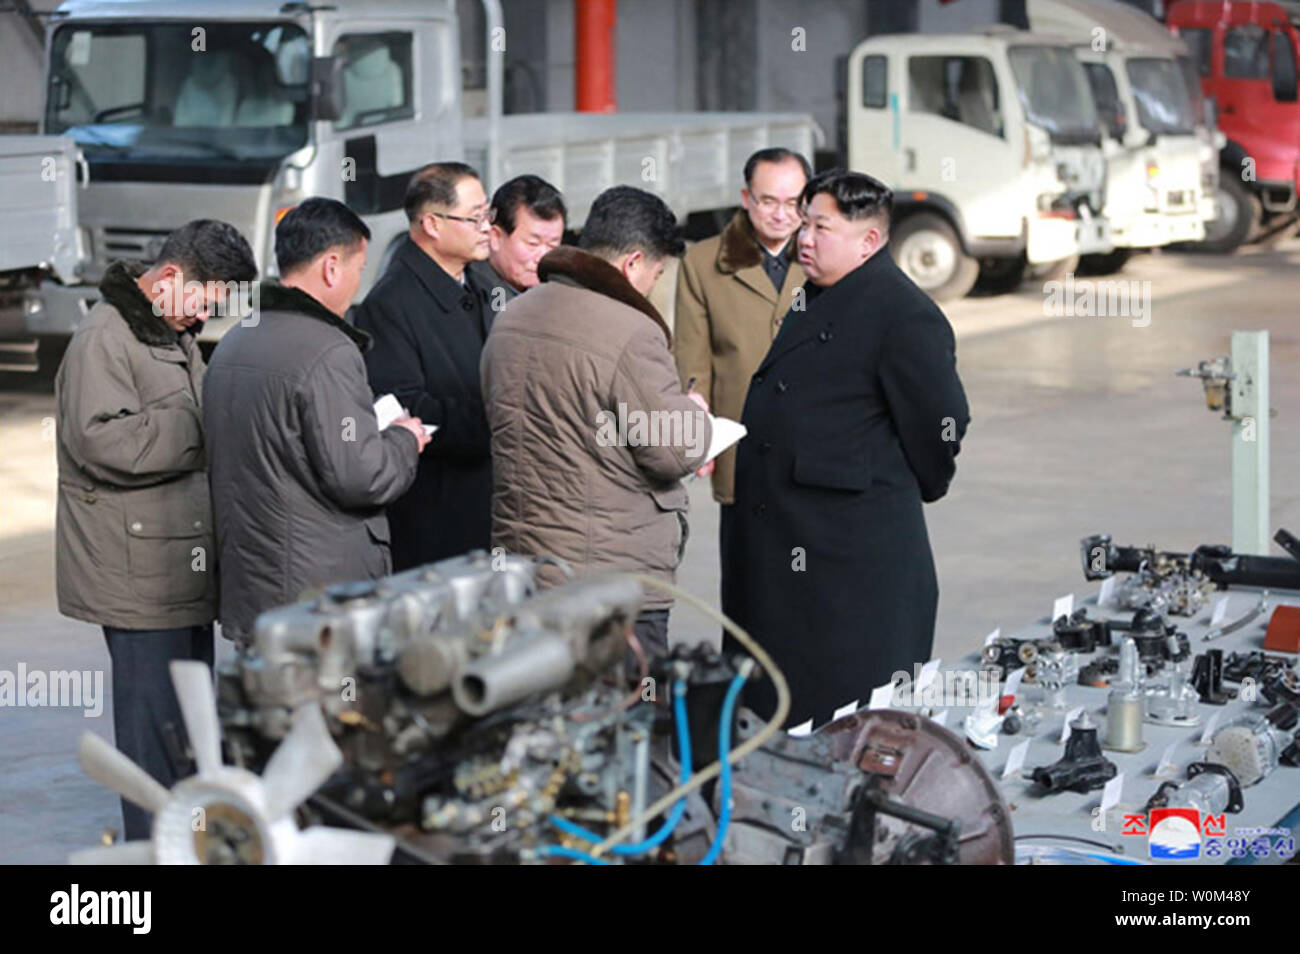 This image released on November 21, 2017, by the North Korean Official News Service (KCNA), shows North Korean leader Kim Jong Un visited the Sungri Motor Complex in Pyongyang. During his tour of the facilities, Kim took the wheel of a newly manufactured truck to experience its performance and technical capabilities. Accompanying him were O Su Yong and Pak Thae Song, vice-chairmen of the C.C., Workers' Party of Korea (WPK), and Jo Yong Won, vice department director of the C.C., WPK. Photo by KCNA/UPI Stock Photo